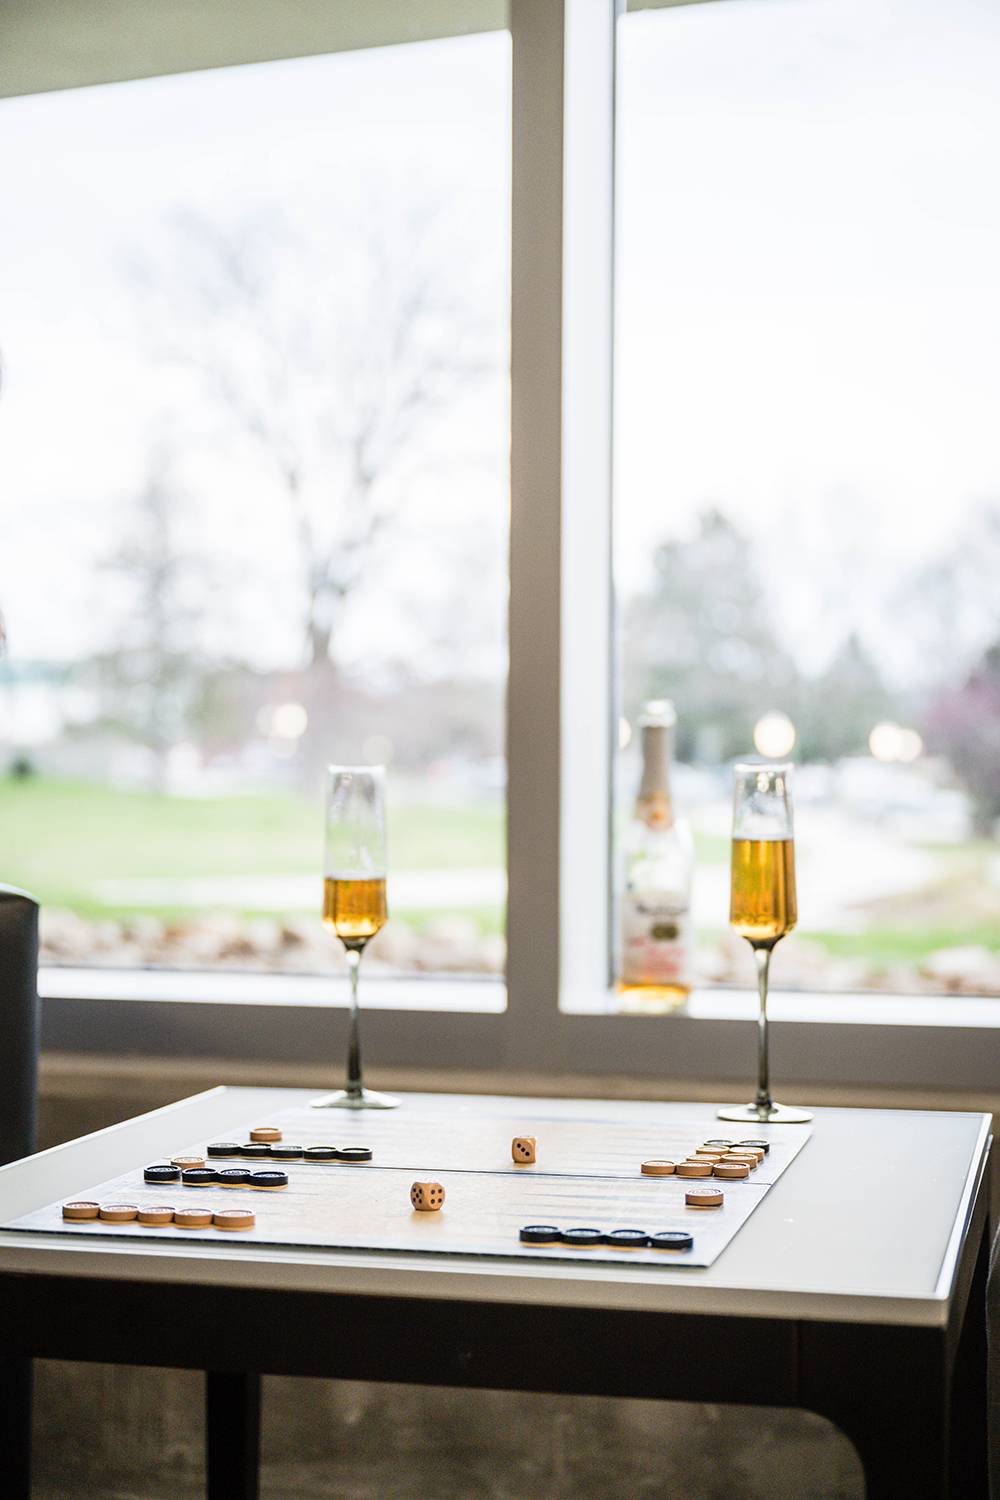 Two champagne flutes partially full of non-alcoholic cider sit atop a table with a Backgammon board game and dice set up.